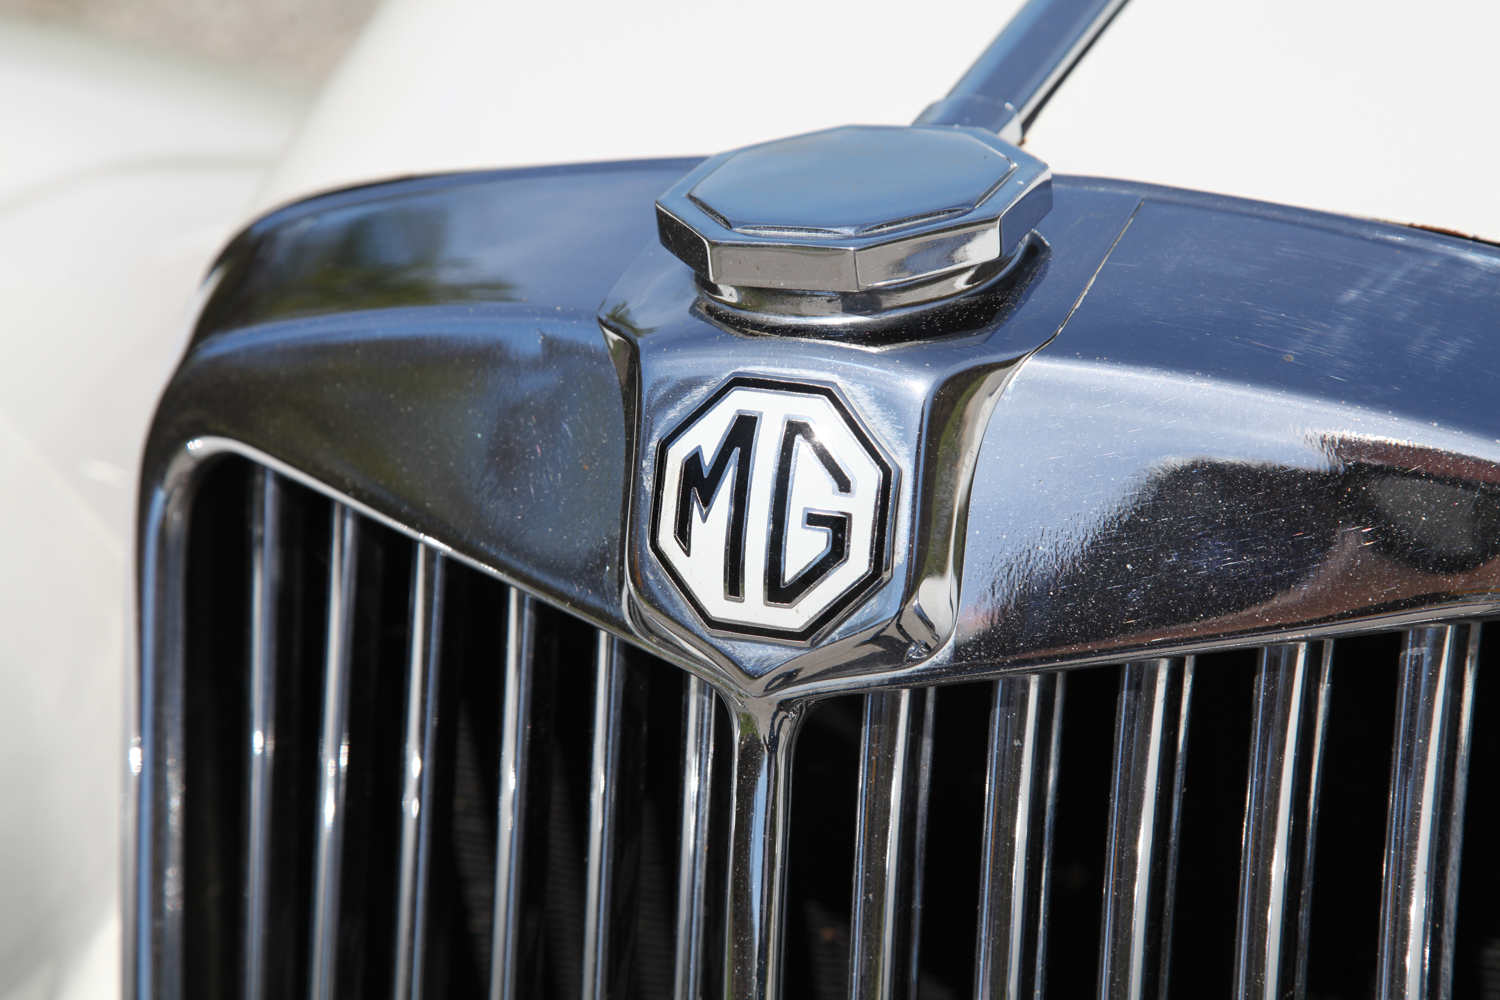 The MG badge is a wonderful example of the Art Deco style.